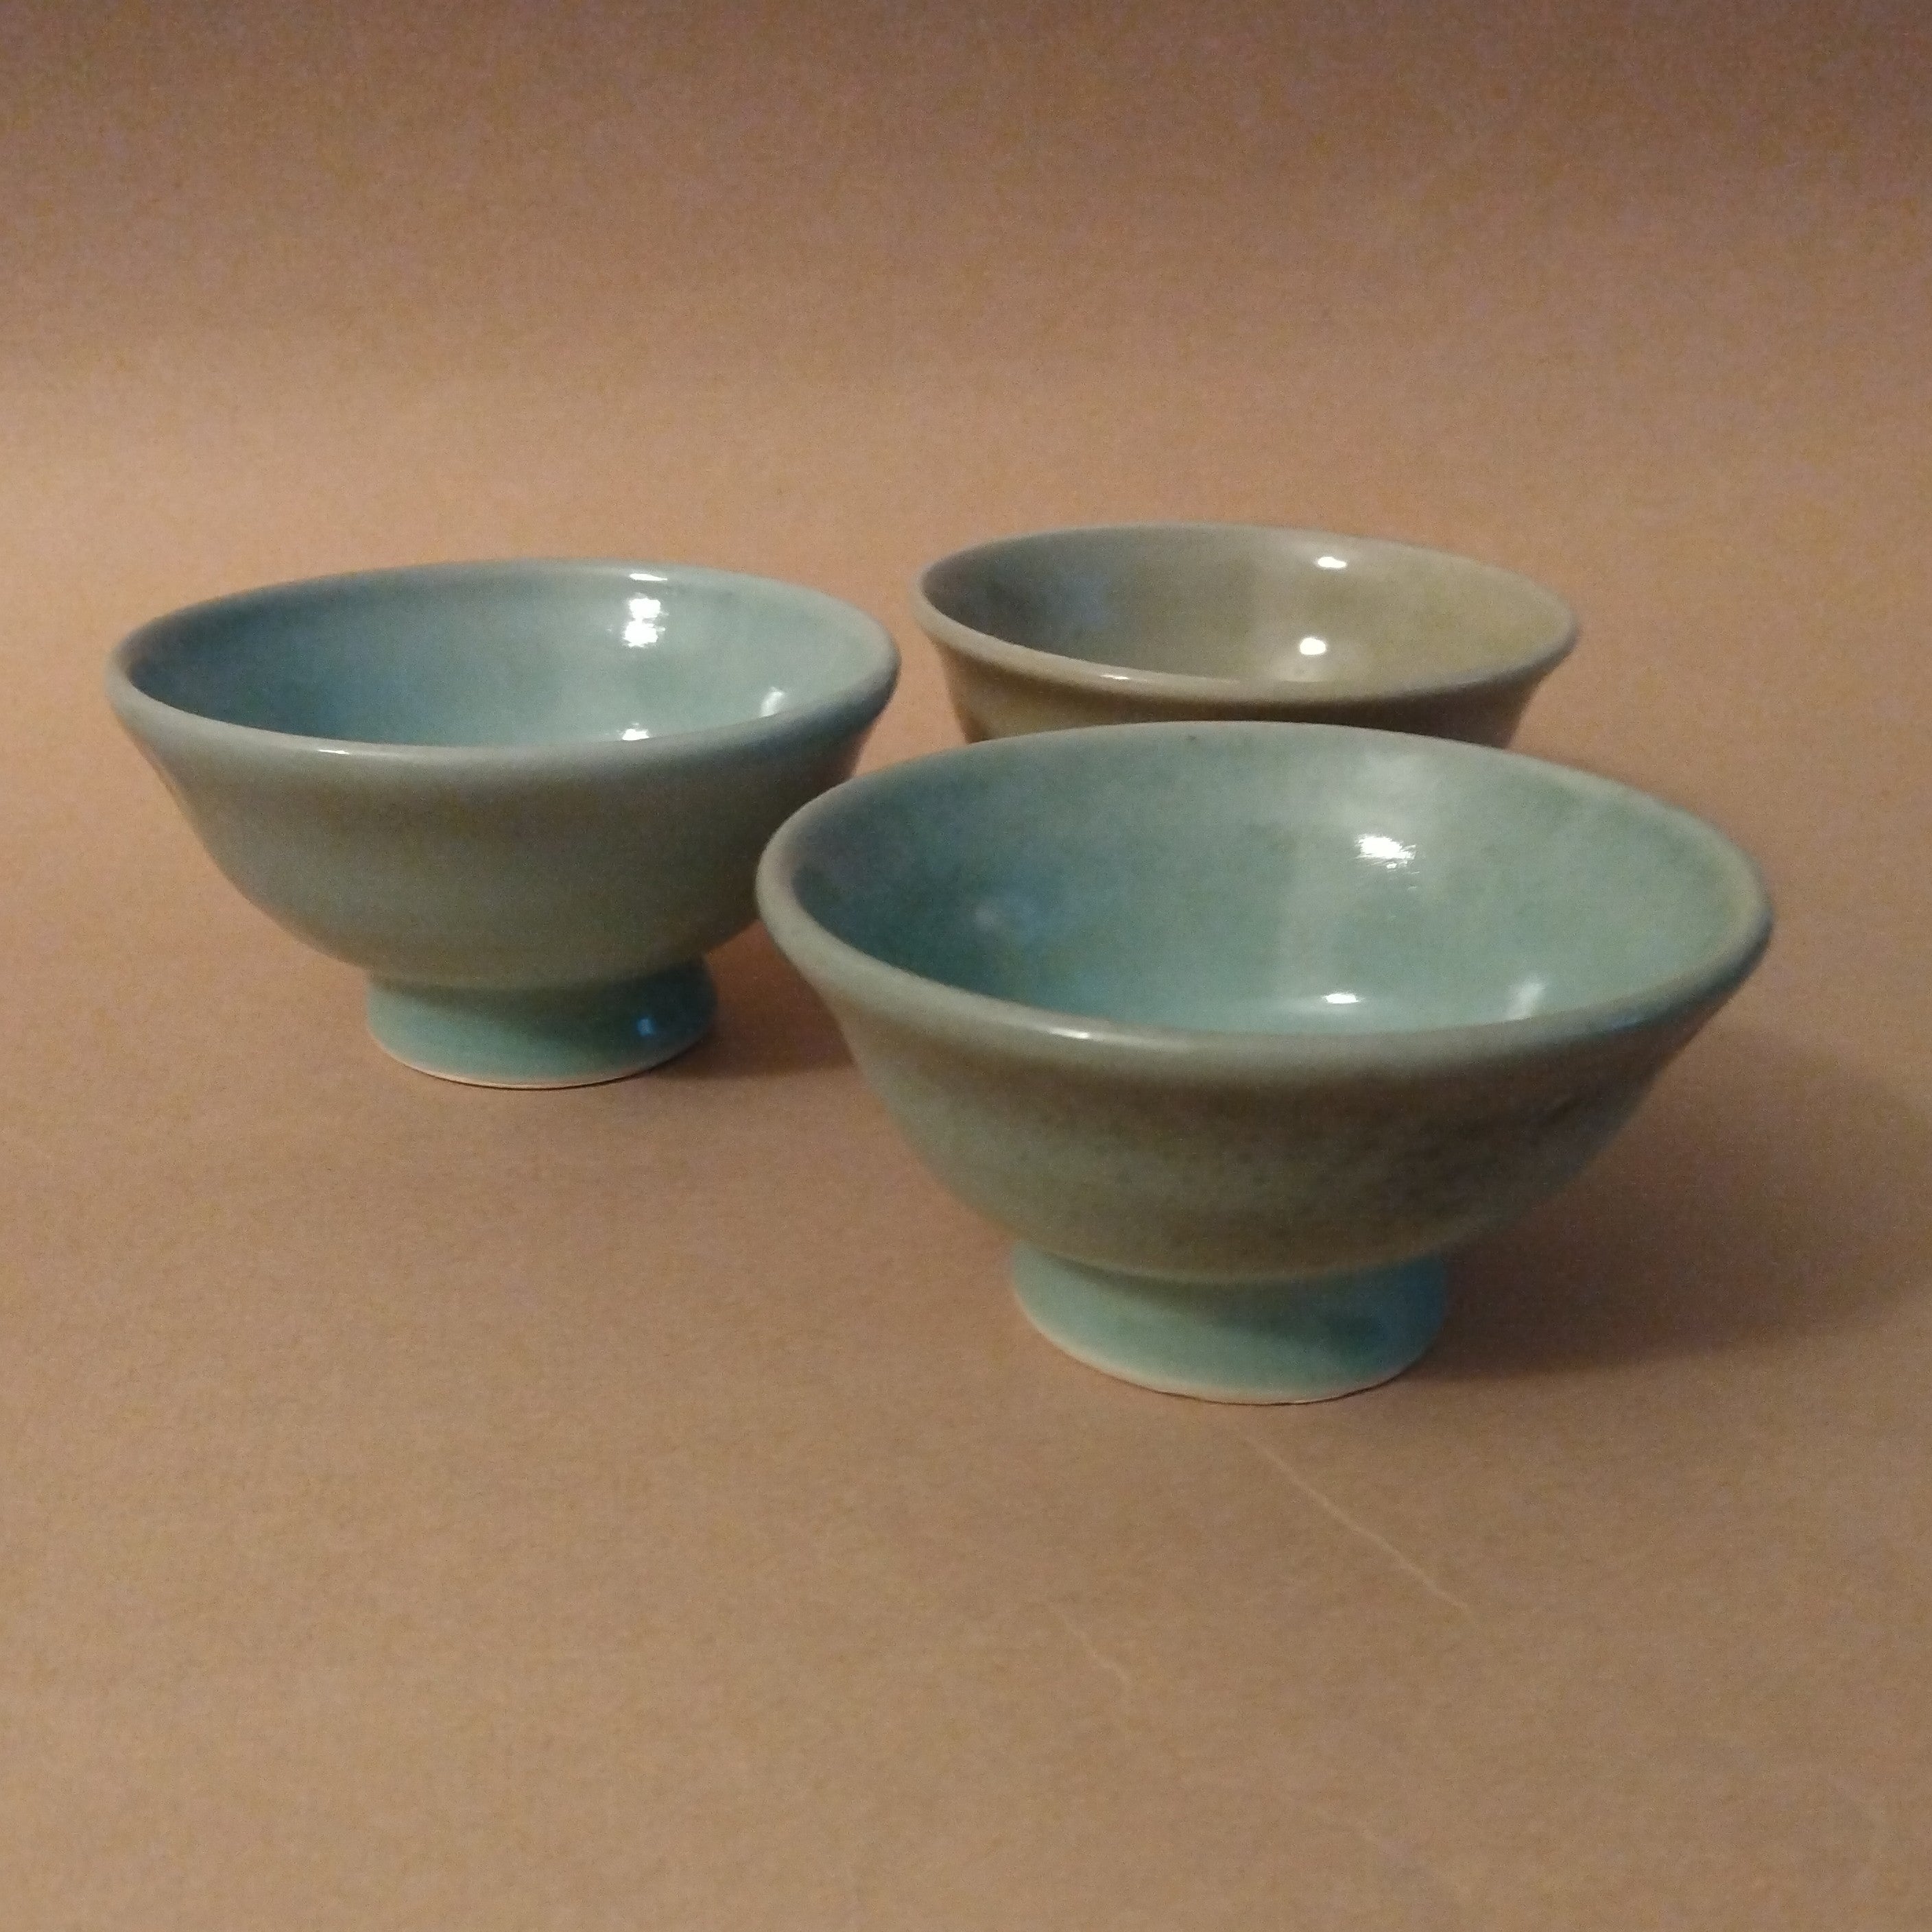 Sake, Tea, or Whisky Cups with Infinity Knot by George Gledhill